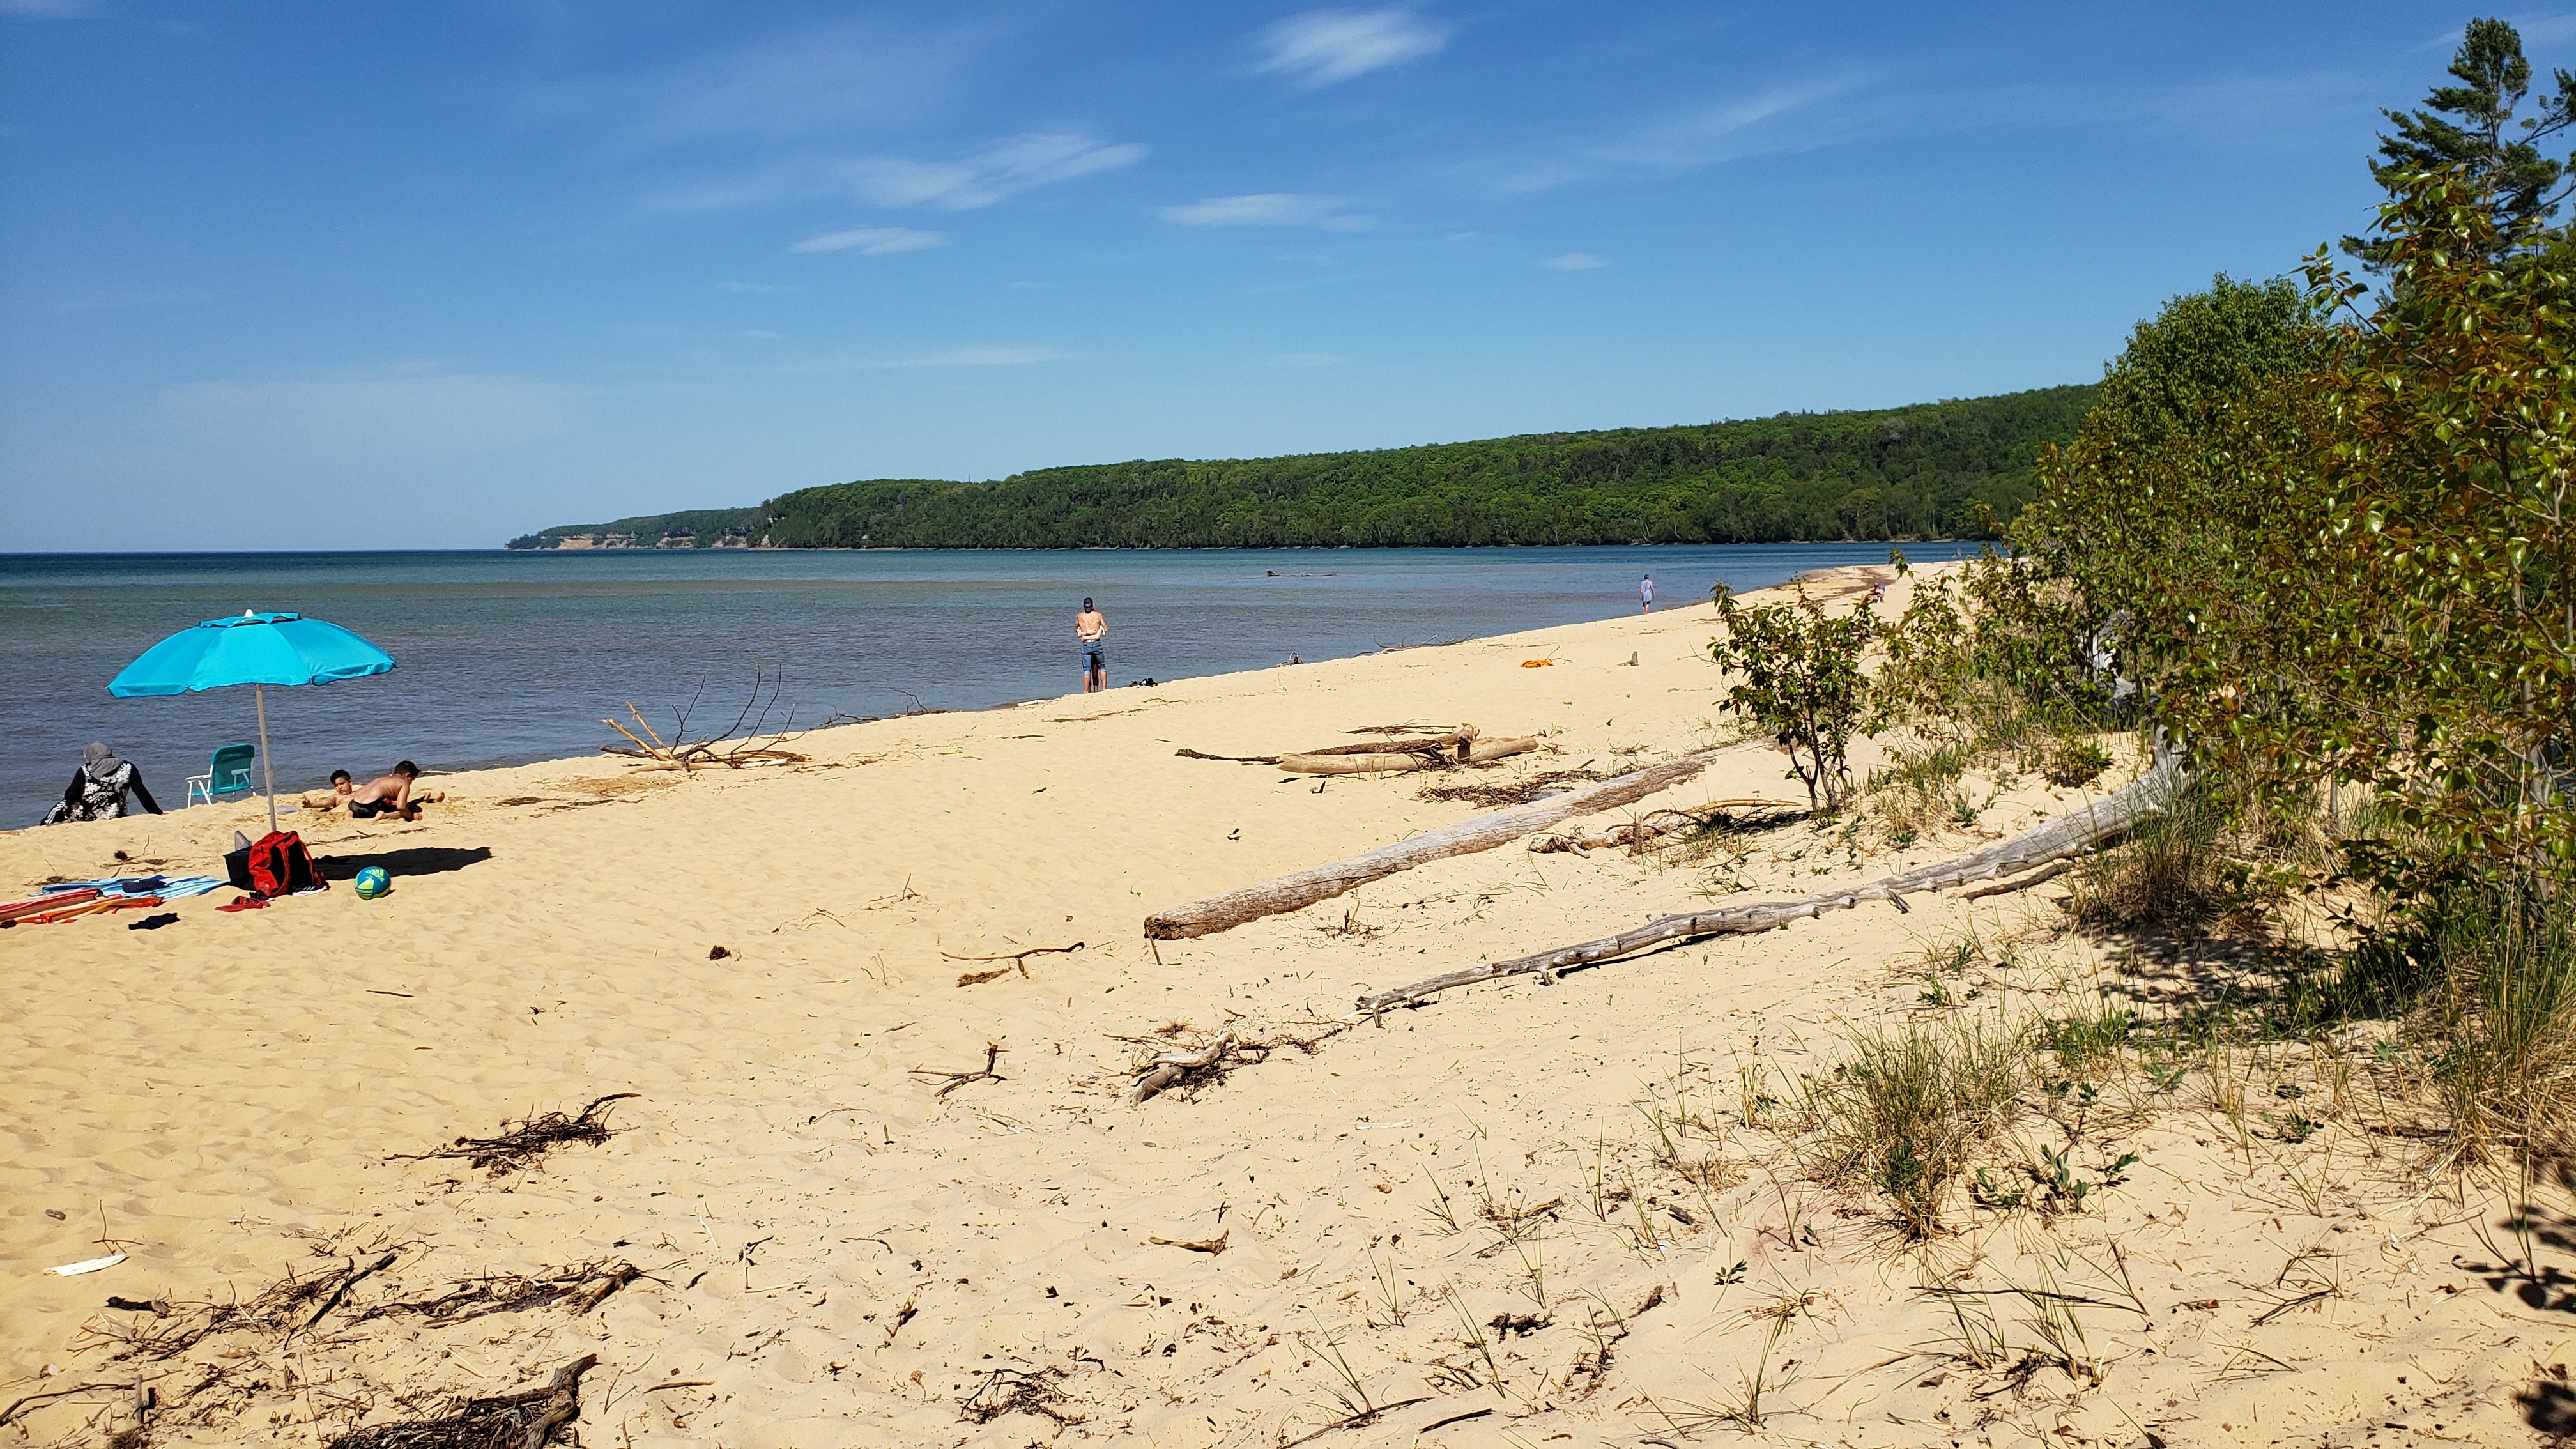 One of many secluded beaches in Michigan's Upper Peninsula